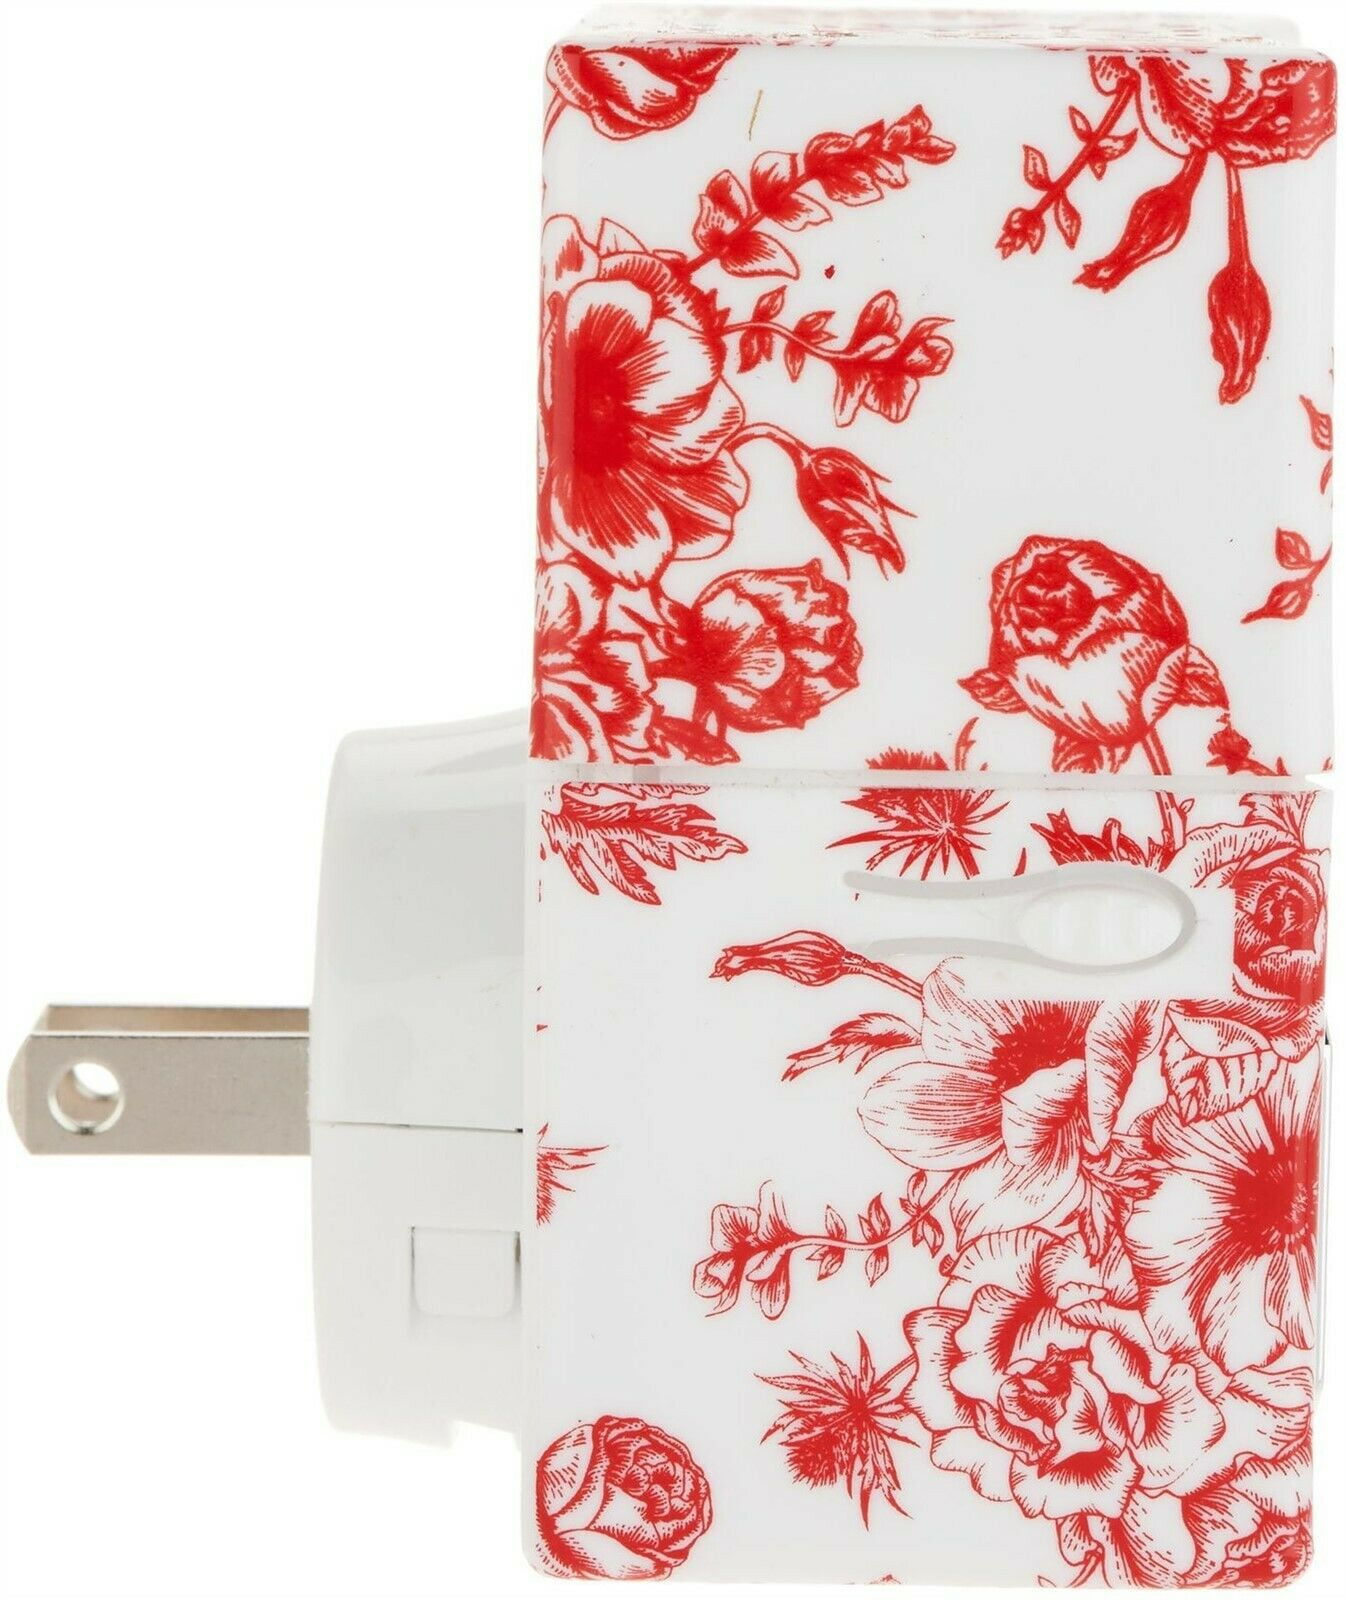 Details about   HomeWorx by Harry Slatkin Set of 2 Plug In Diffusers in Red Toile            AO3 